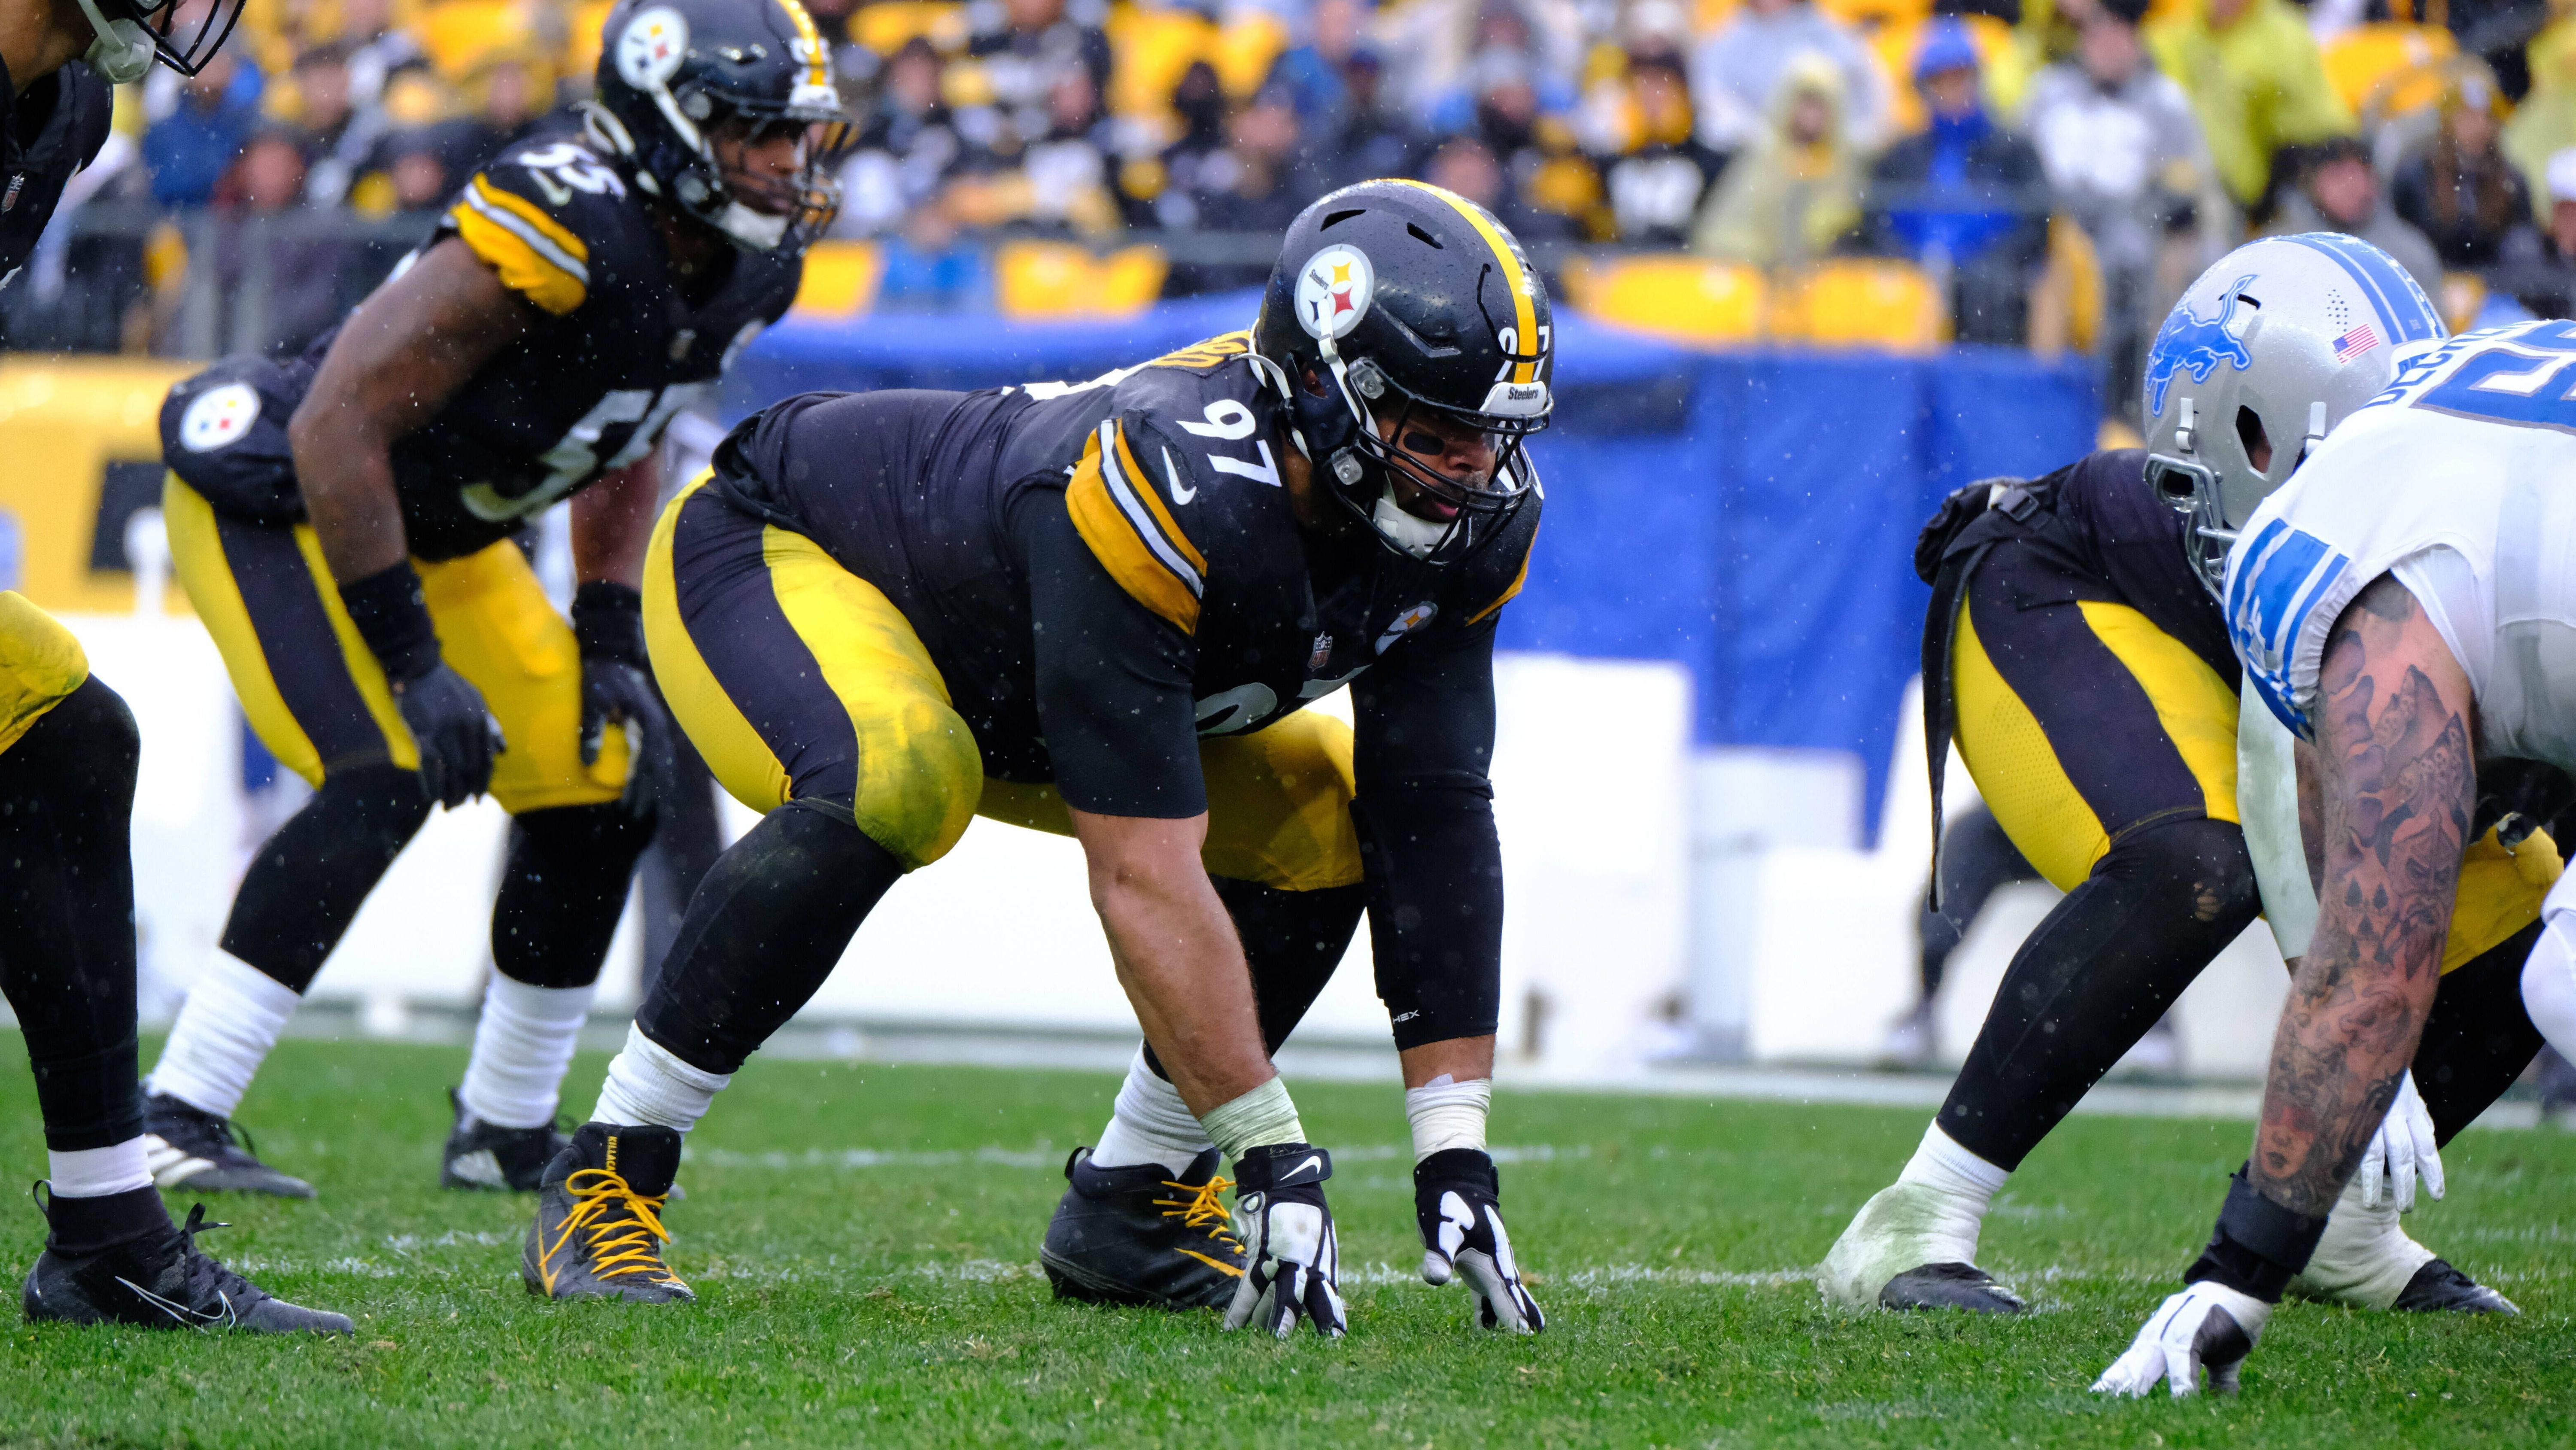 
                <strong>Cameron Heyward</strong><br>
                Team: Pittsburgh Steelers -Position: Defensive End
              